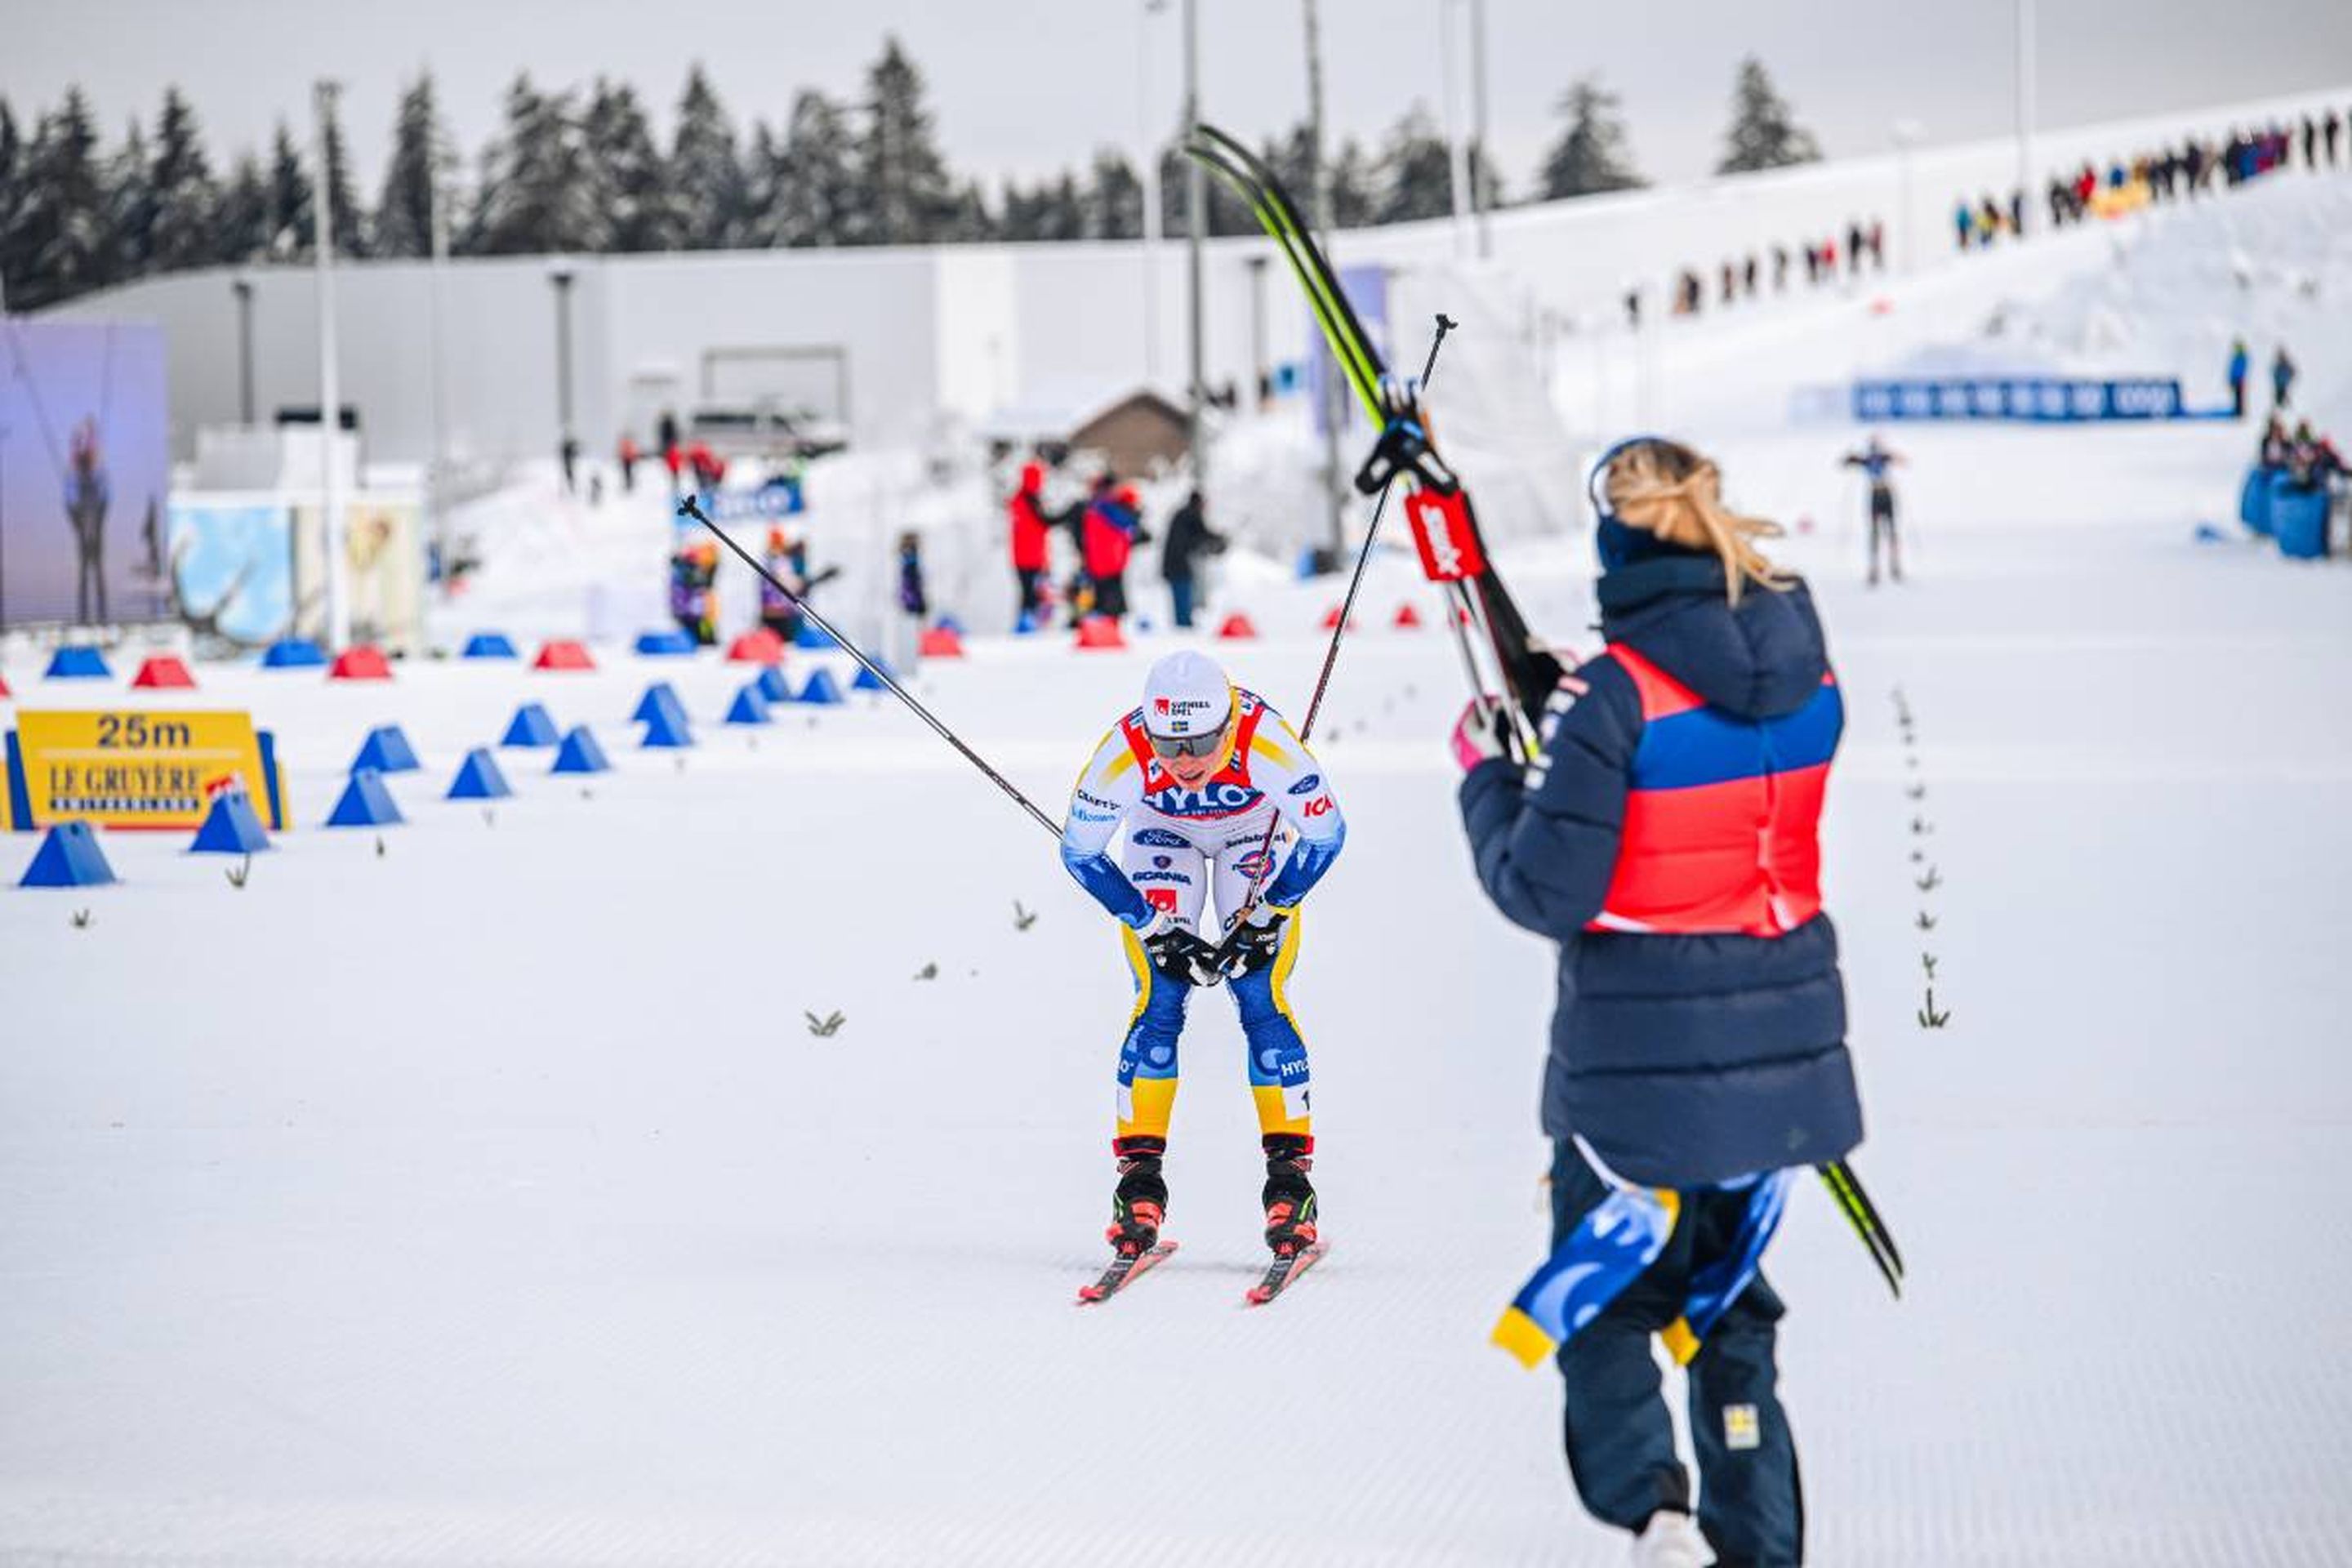 A relieved Jonna Sundling (SWE) crosses the finish line to bring the first place to Sweden, celebrated by her teammates © NordicFocus